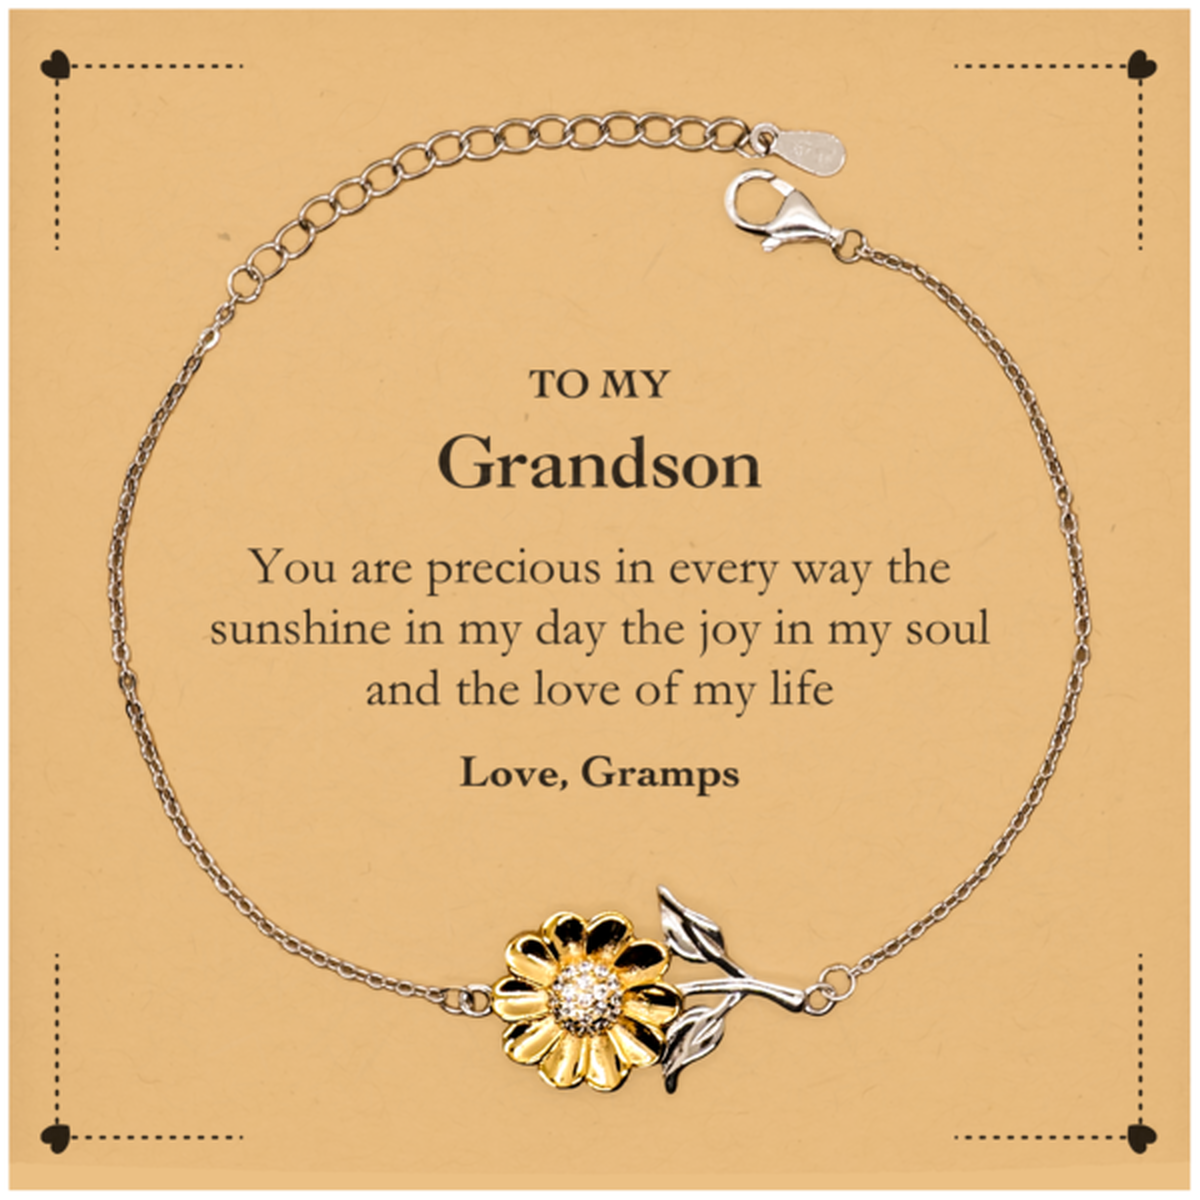 Graduation Gifts for Grandson Sunflower Bracelet Present from Gramps, Christmas Grandson Birthday Gifts Grandson You are precious in every way the sunshine in my day. Love, Gramps